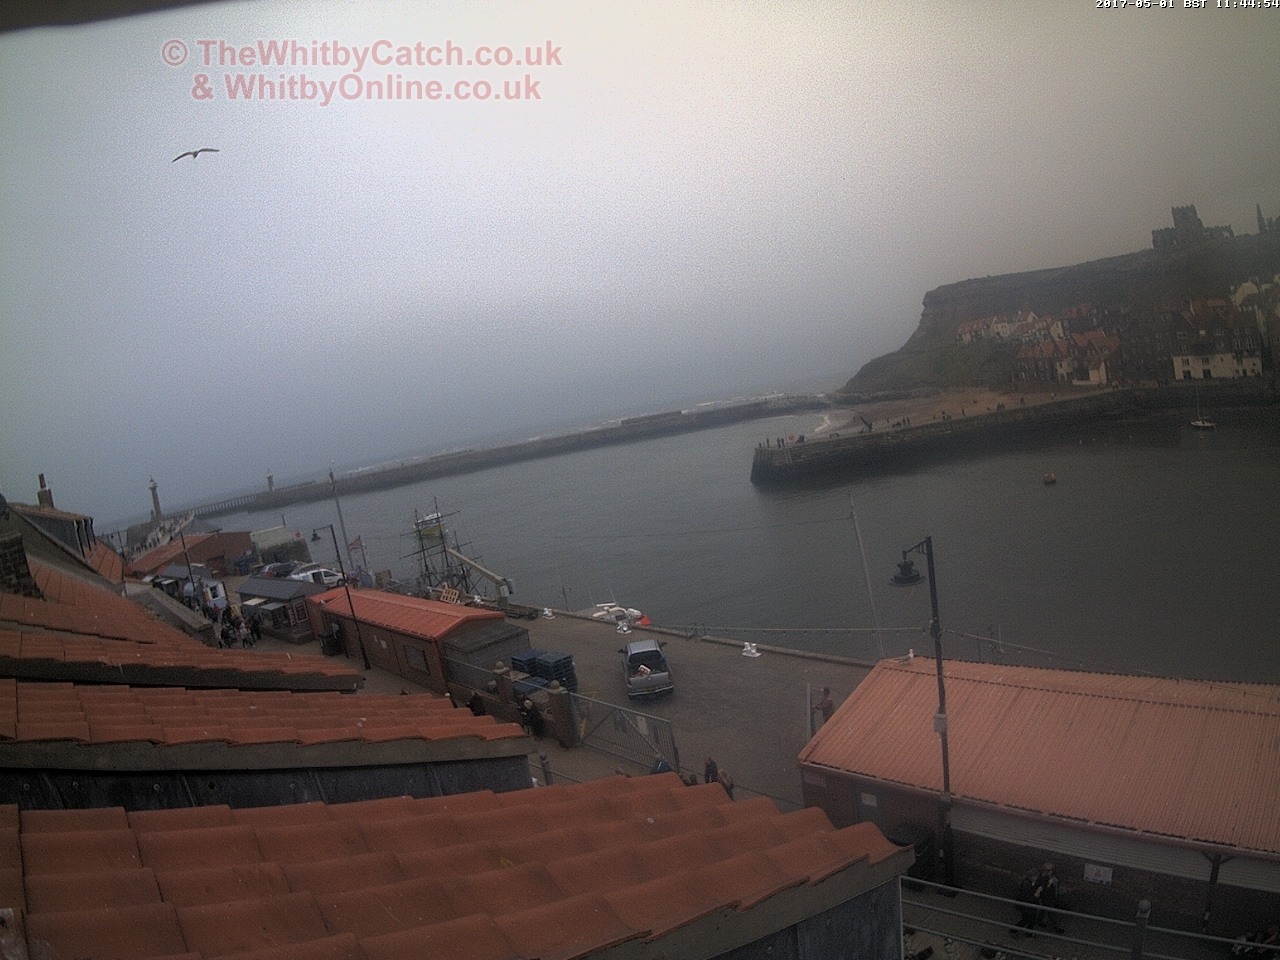 Whitby Mon 1st May 2017 11:45.